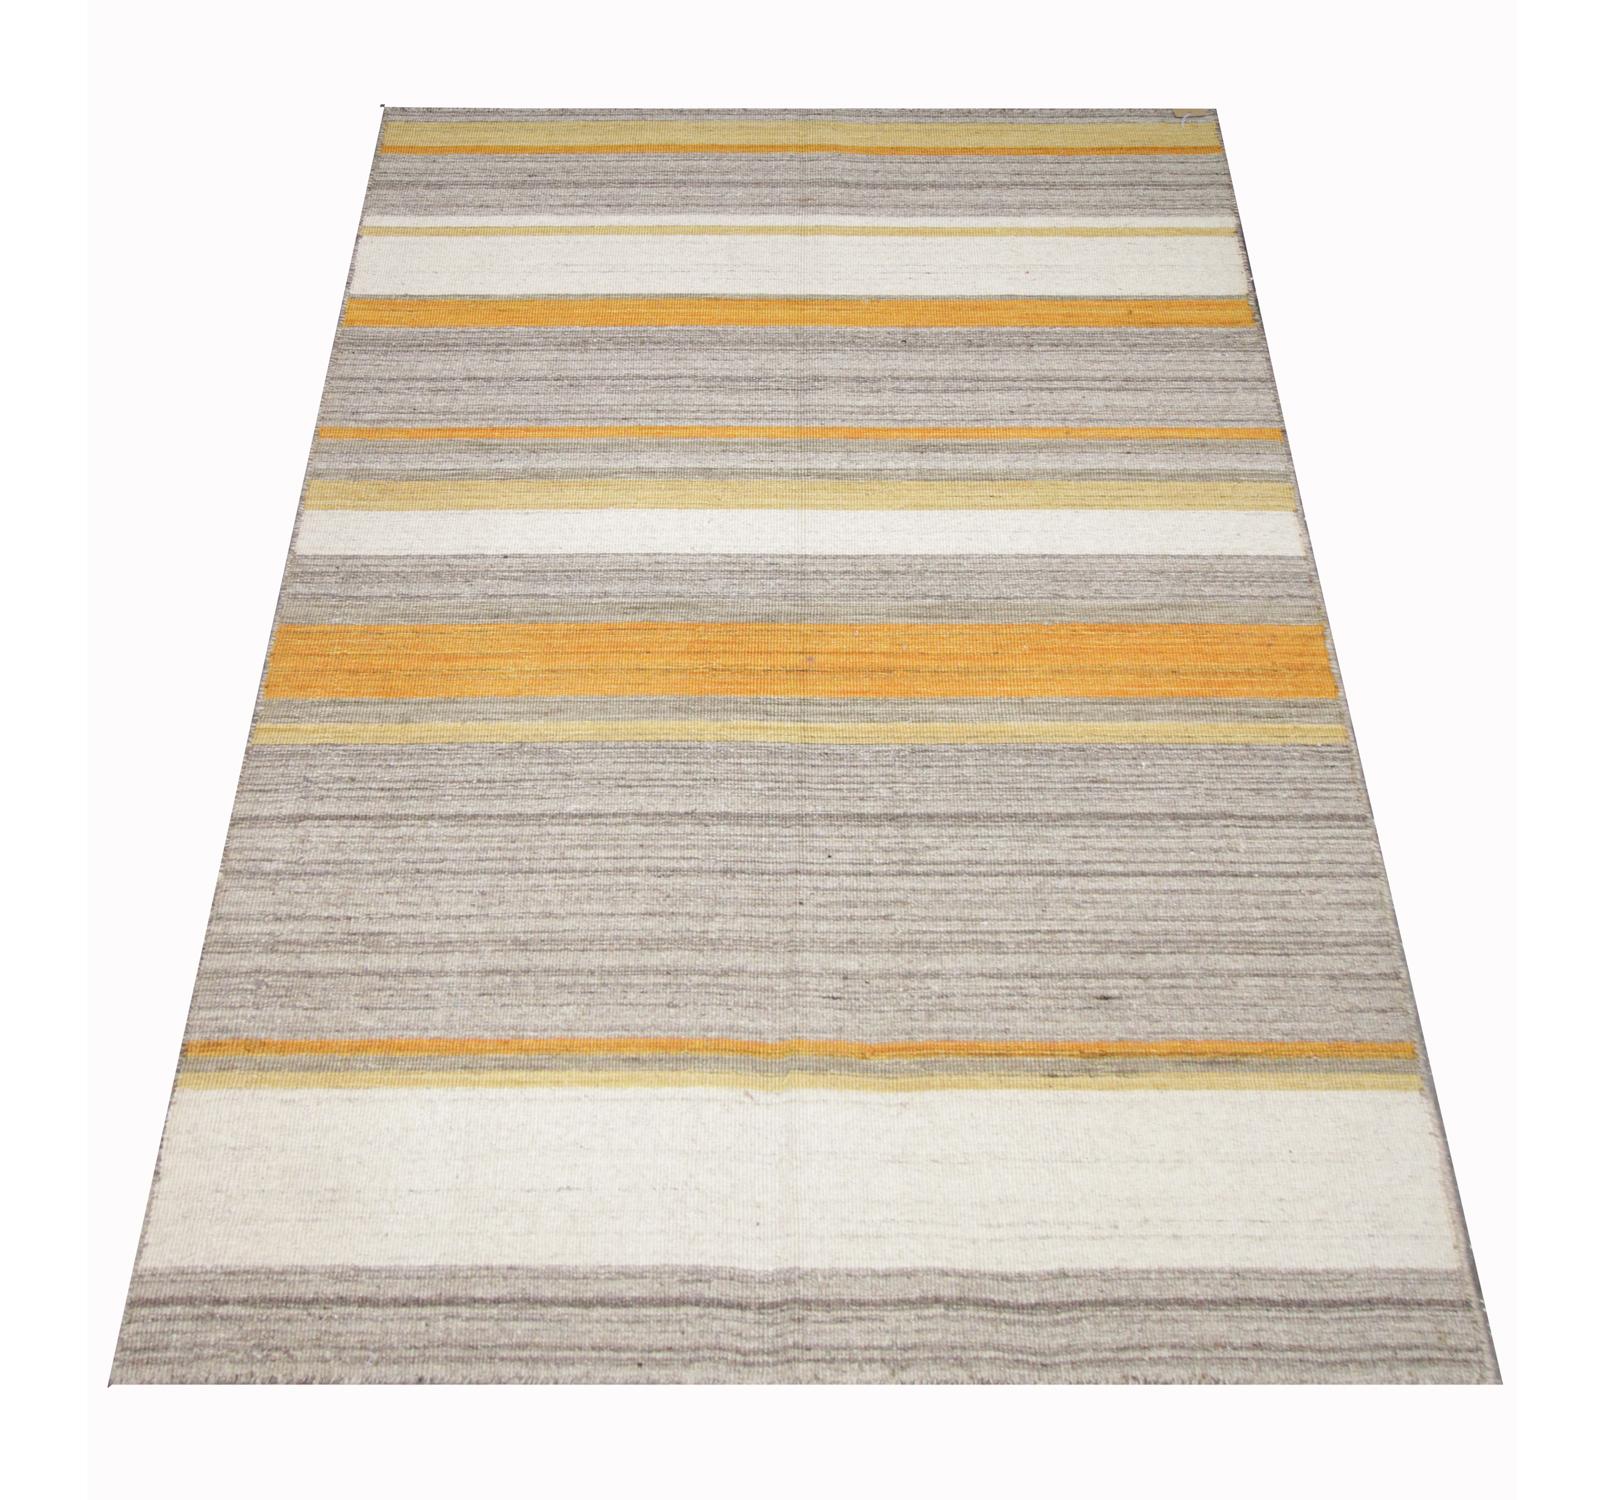 This piece is a modern kilim woven with a simple contemporary design. Grey, cream and yellow stripes make up the abstract pattern shown in this piece. Simple yet sophisticated this piece is sure to make the perfect accent rug in any home. 
Kilim